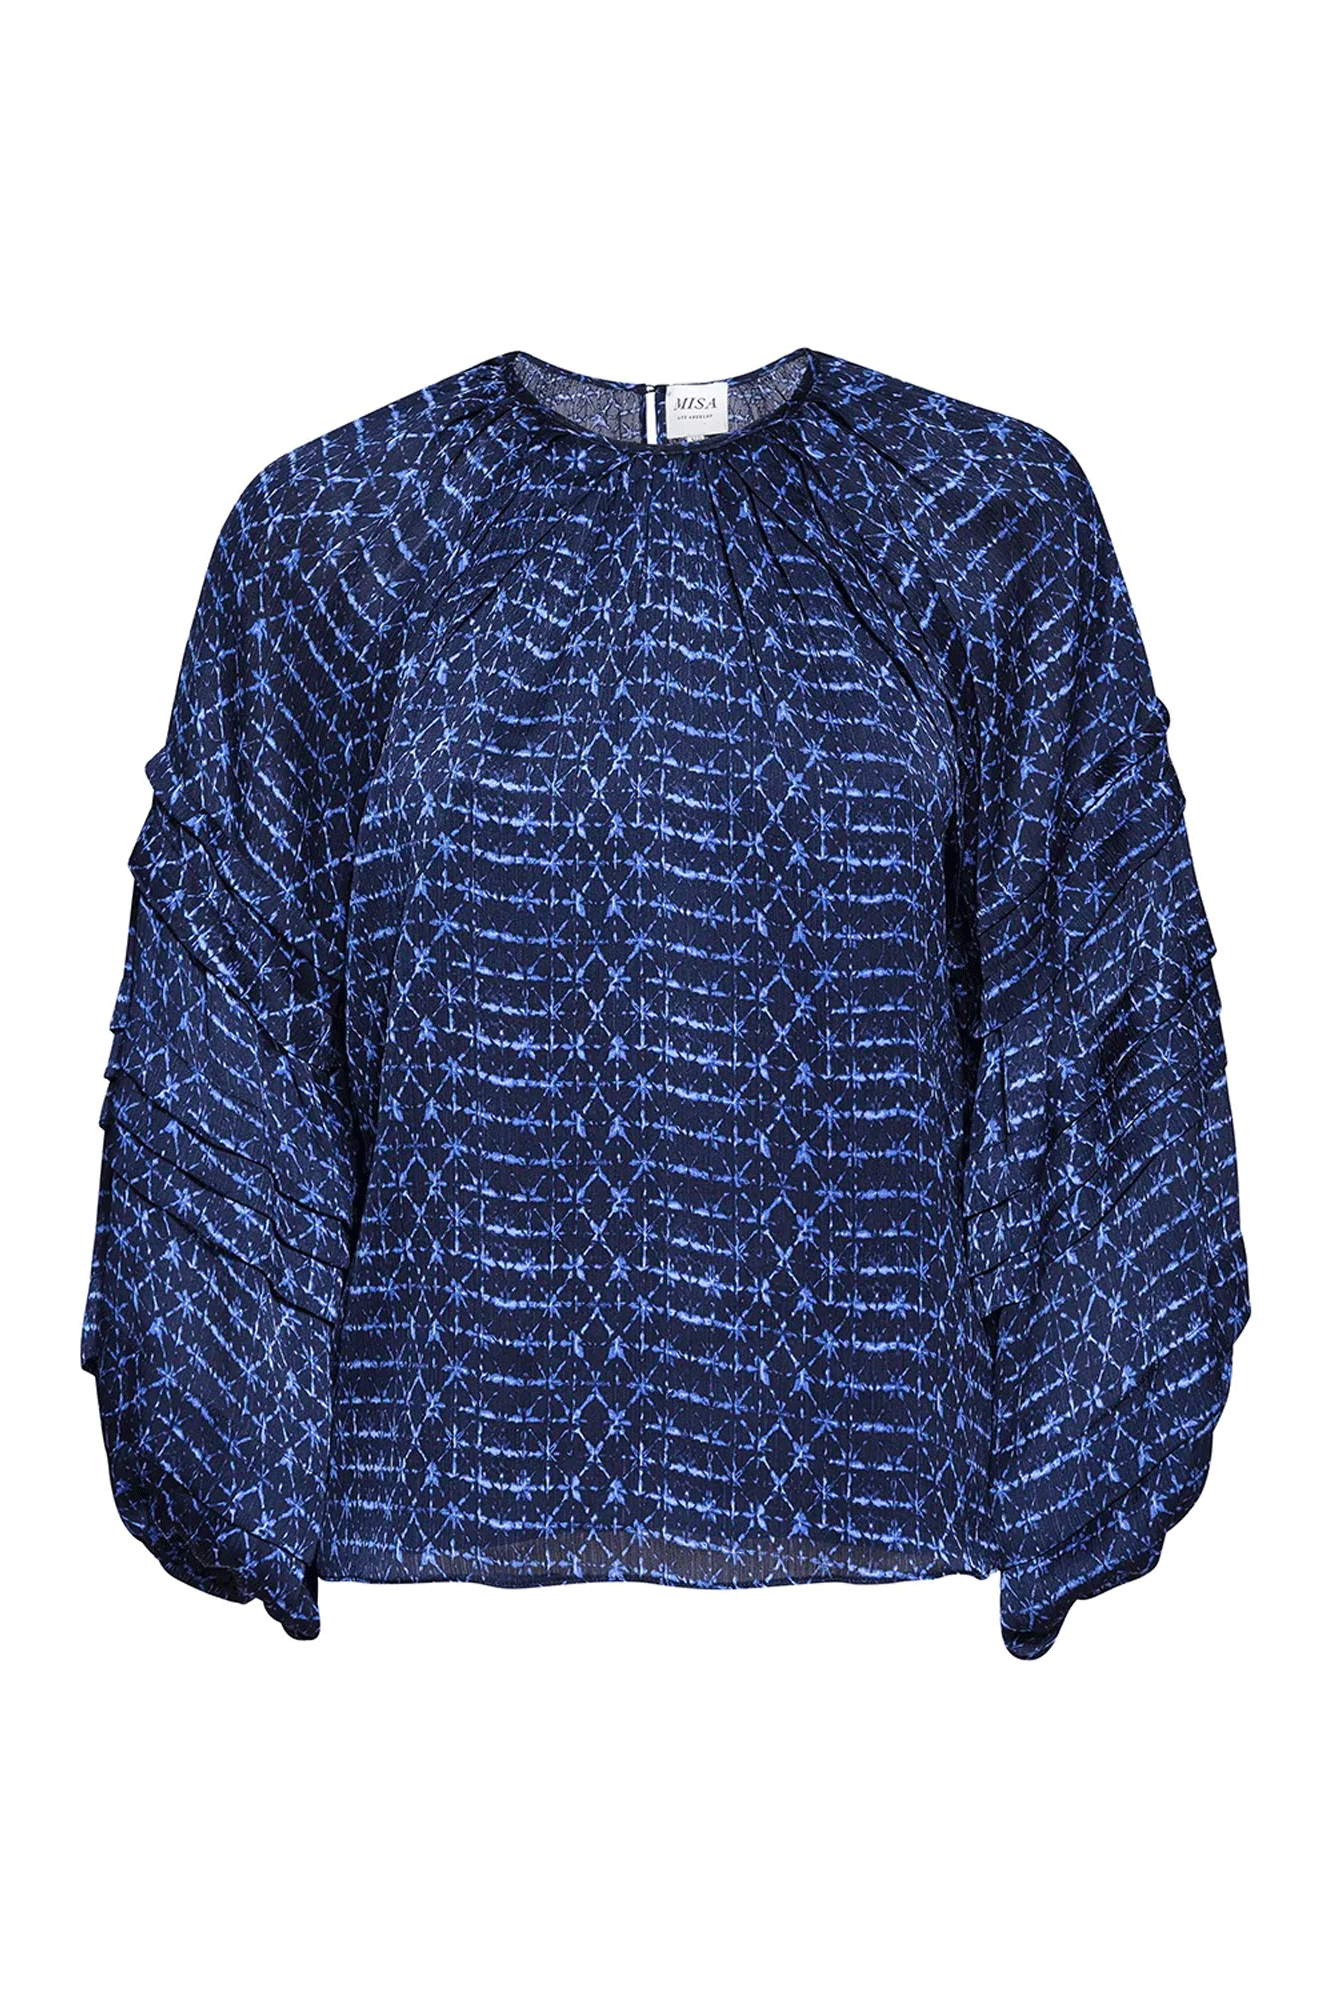 The Victoire Top is the perfect choice for an evening look. Cut in midnight shibori print chiffon, it is detailed with double-edged pleated ruffles along the sleeves and elastic cuffs. Finishing with a back button keyhole closure, the Victoire Top easily pairs with leather pants and boots for a stylish look.